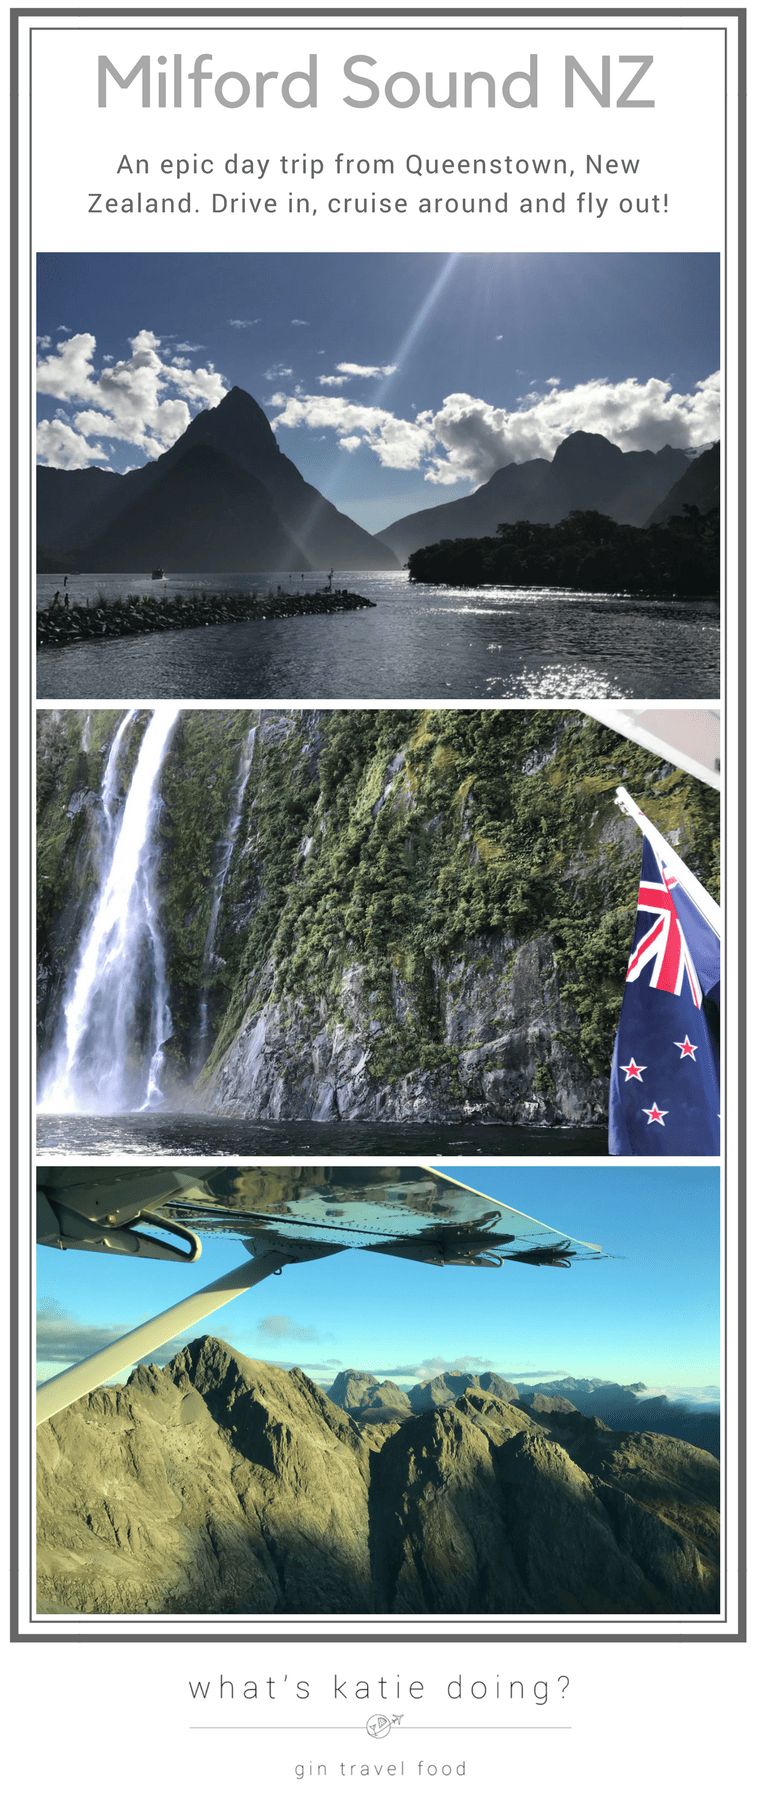 Three pictures of Milford Sound, New Zealand